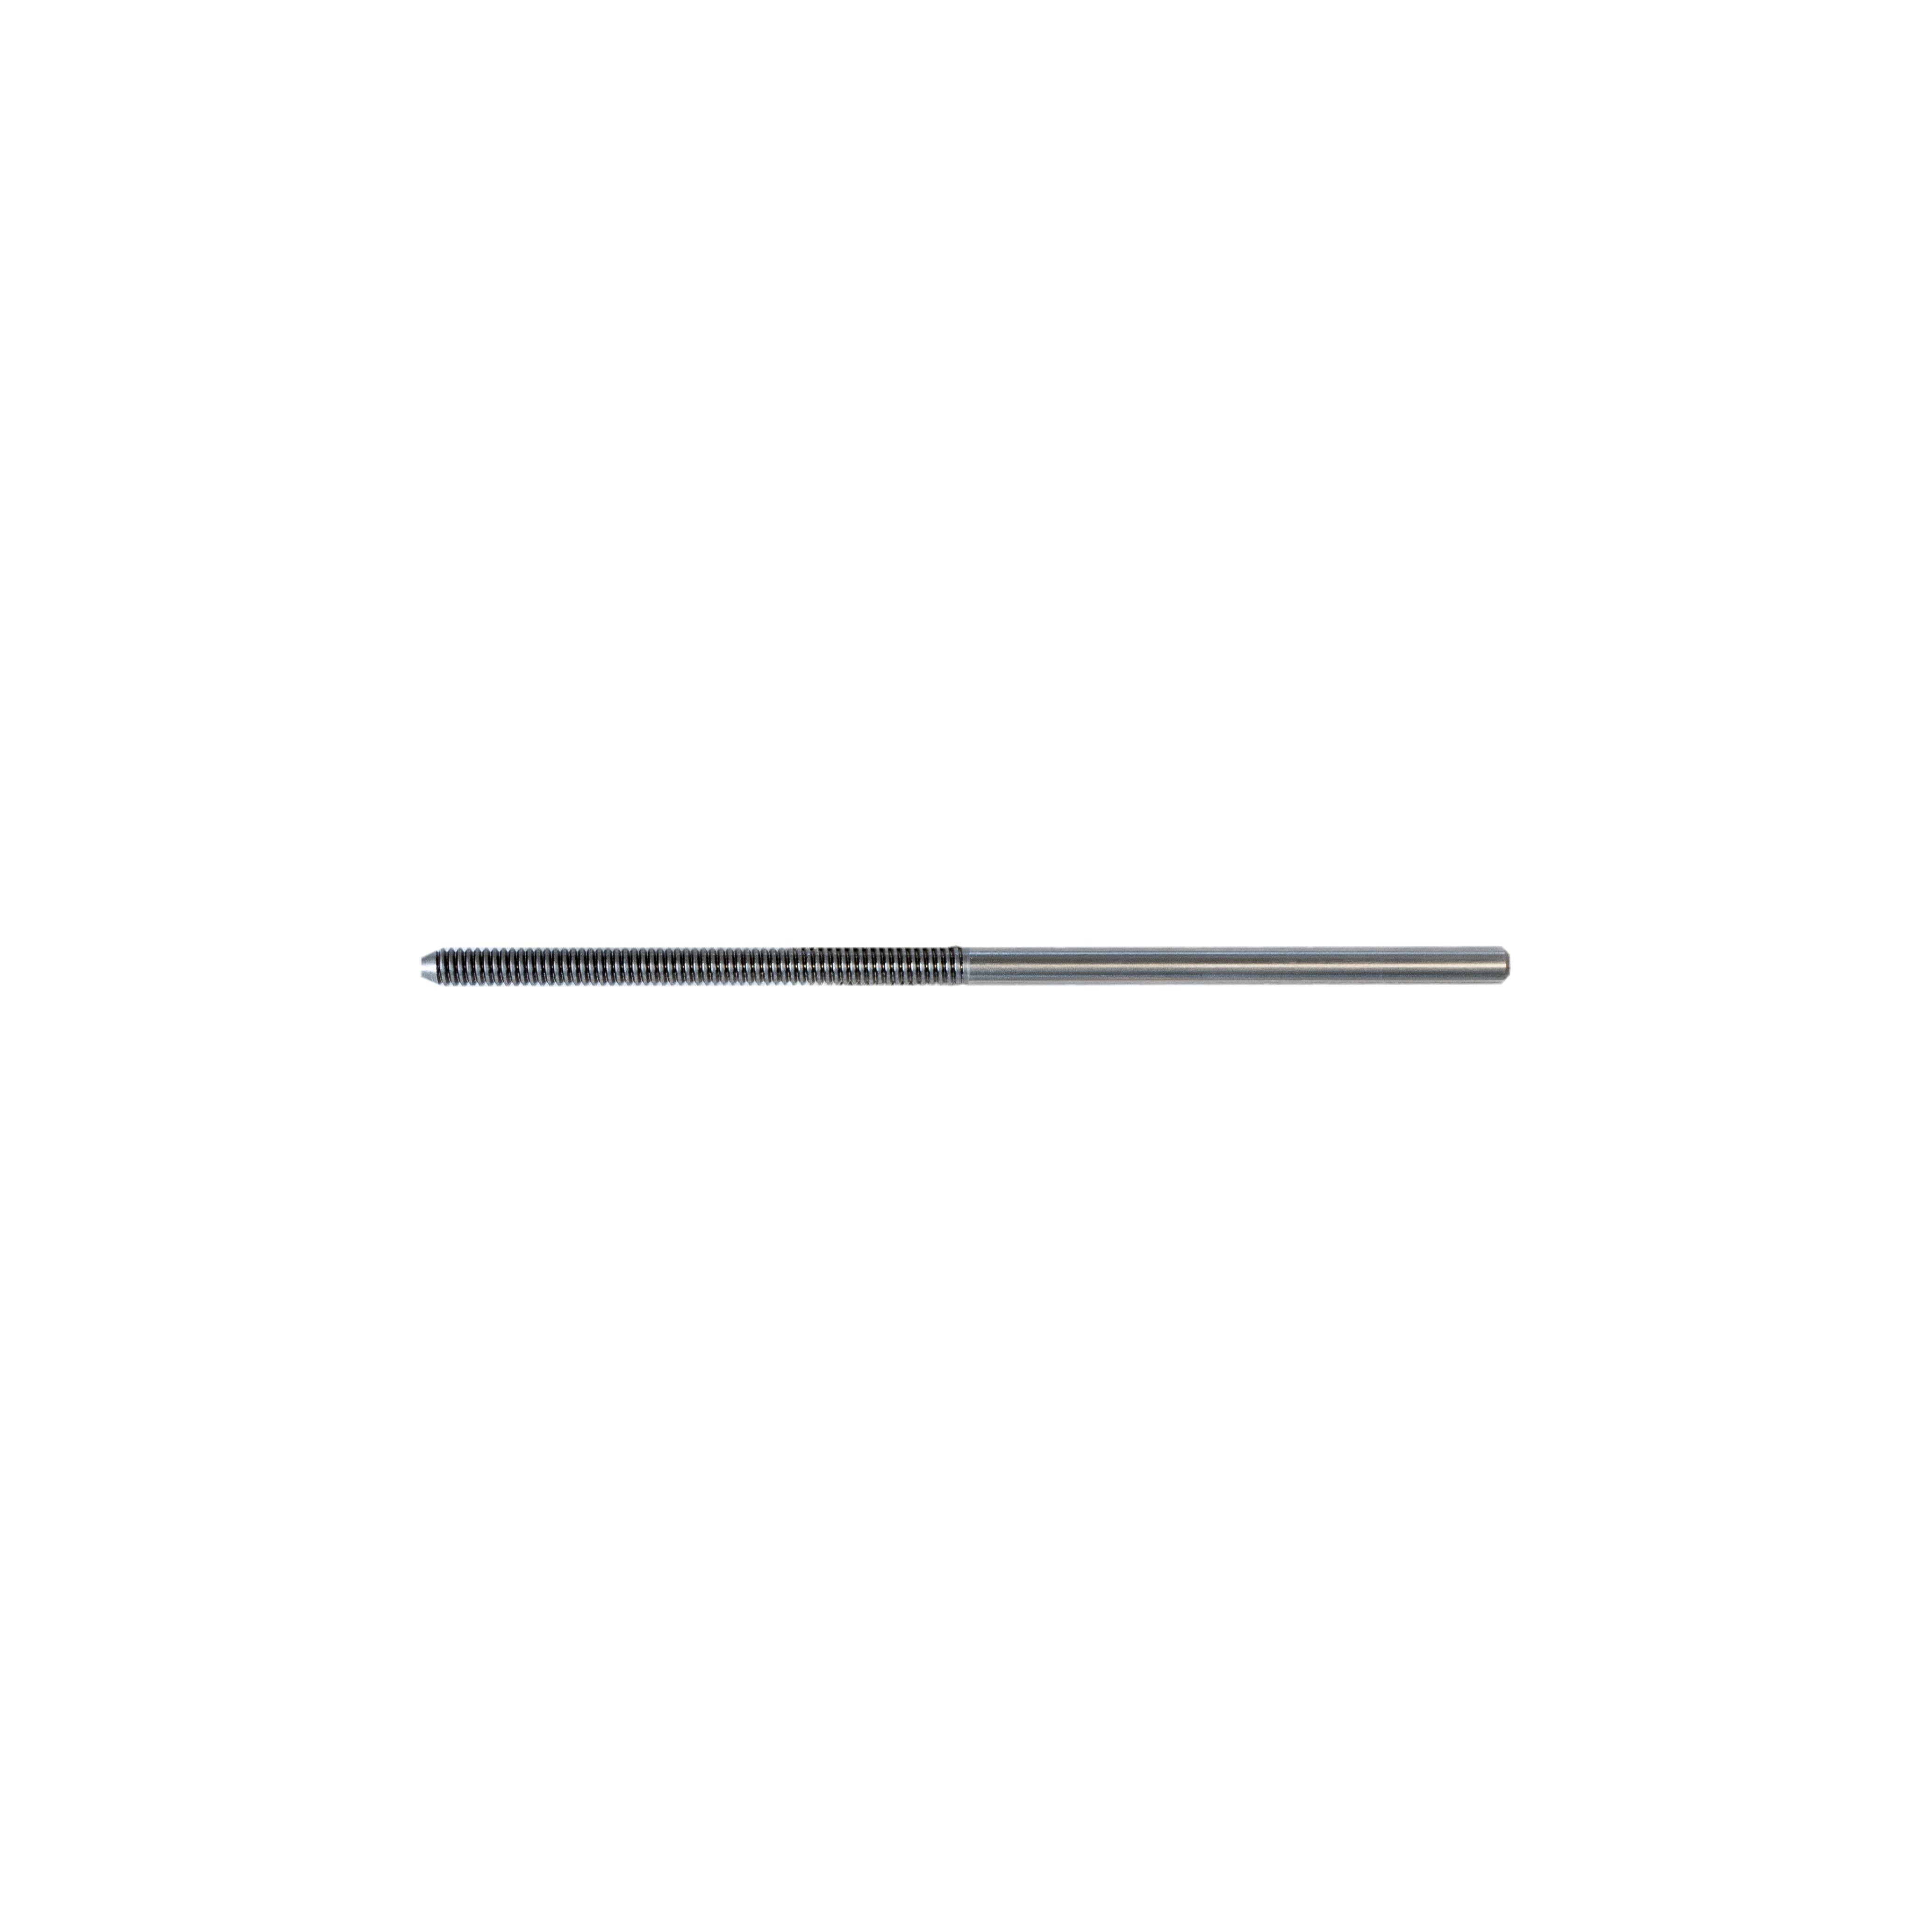 Inch thread 3 mm, Baroque screw, Stainless steel